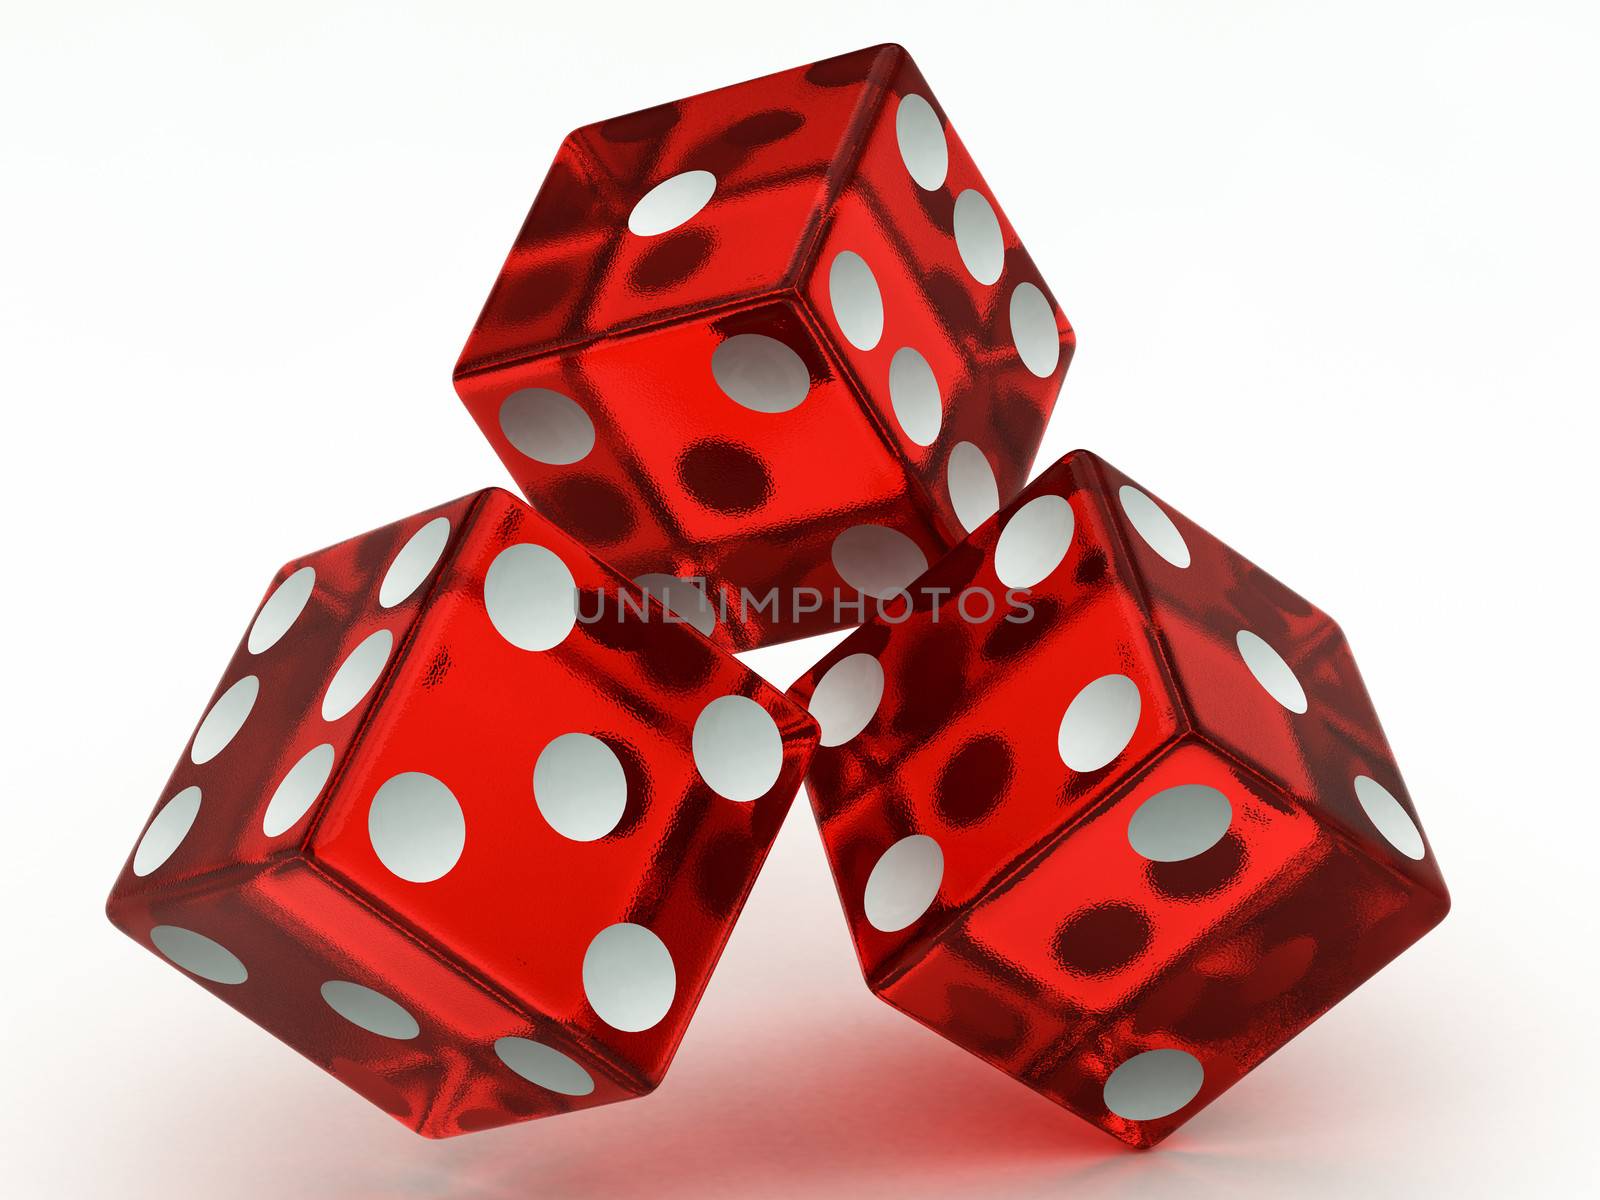 three red dices falling on a white background